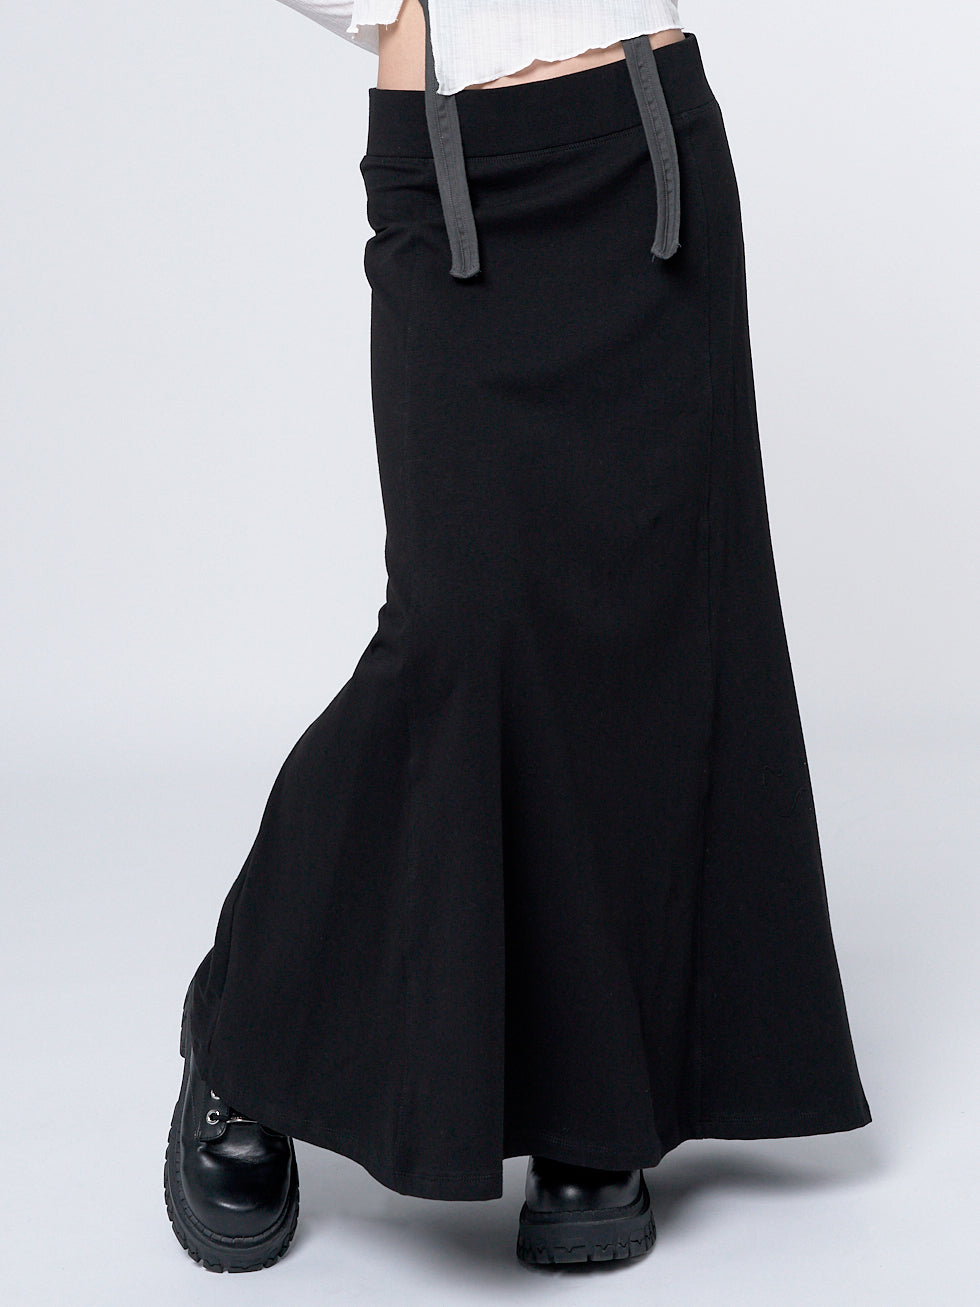 Comfy and stylish black maxi skirt with a lined design. Perfect for effortless comfort and a fashionable look.